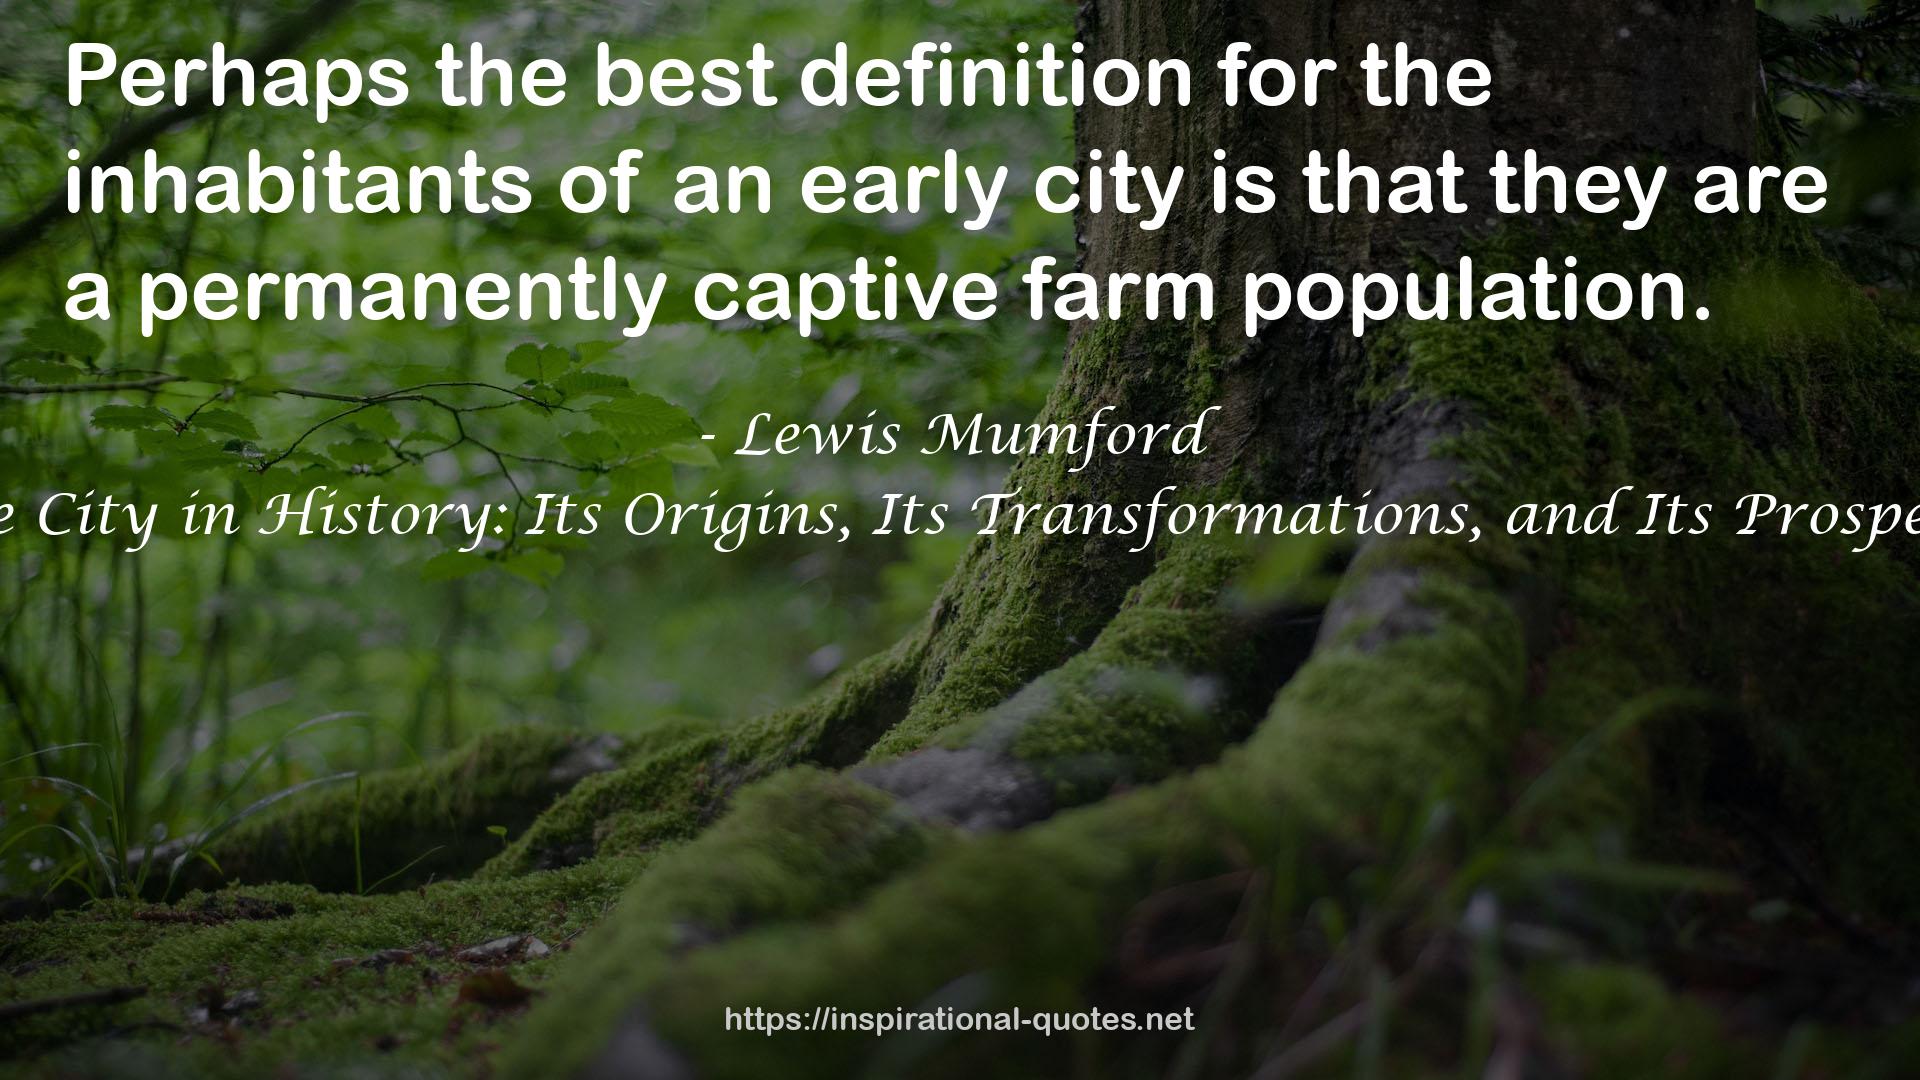 The City in History: Its Origins, Its Transformations, and Its Prospects QUOTES